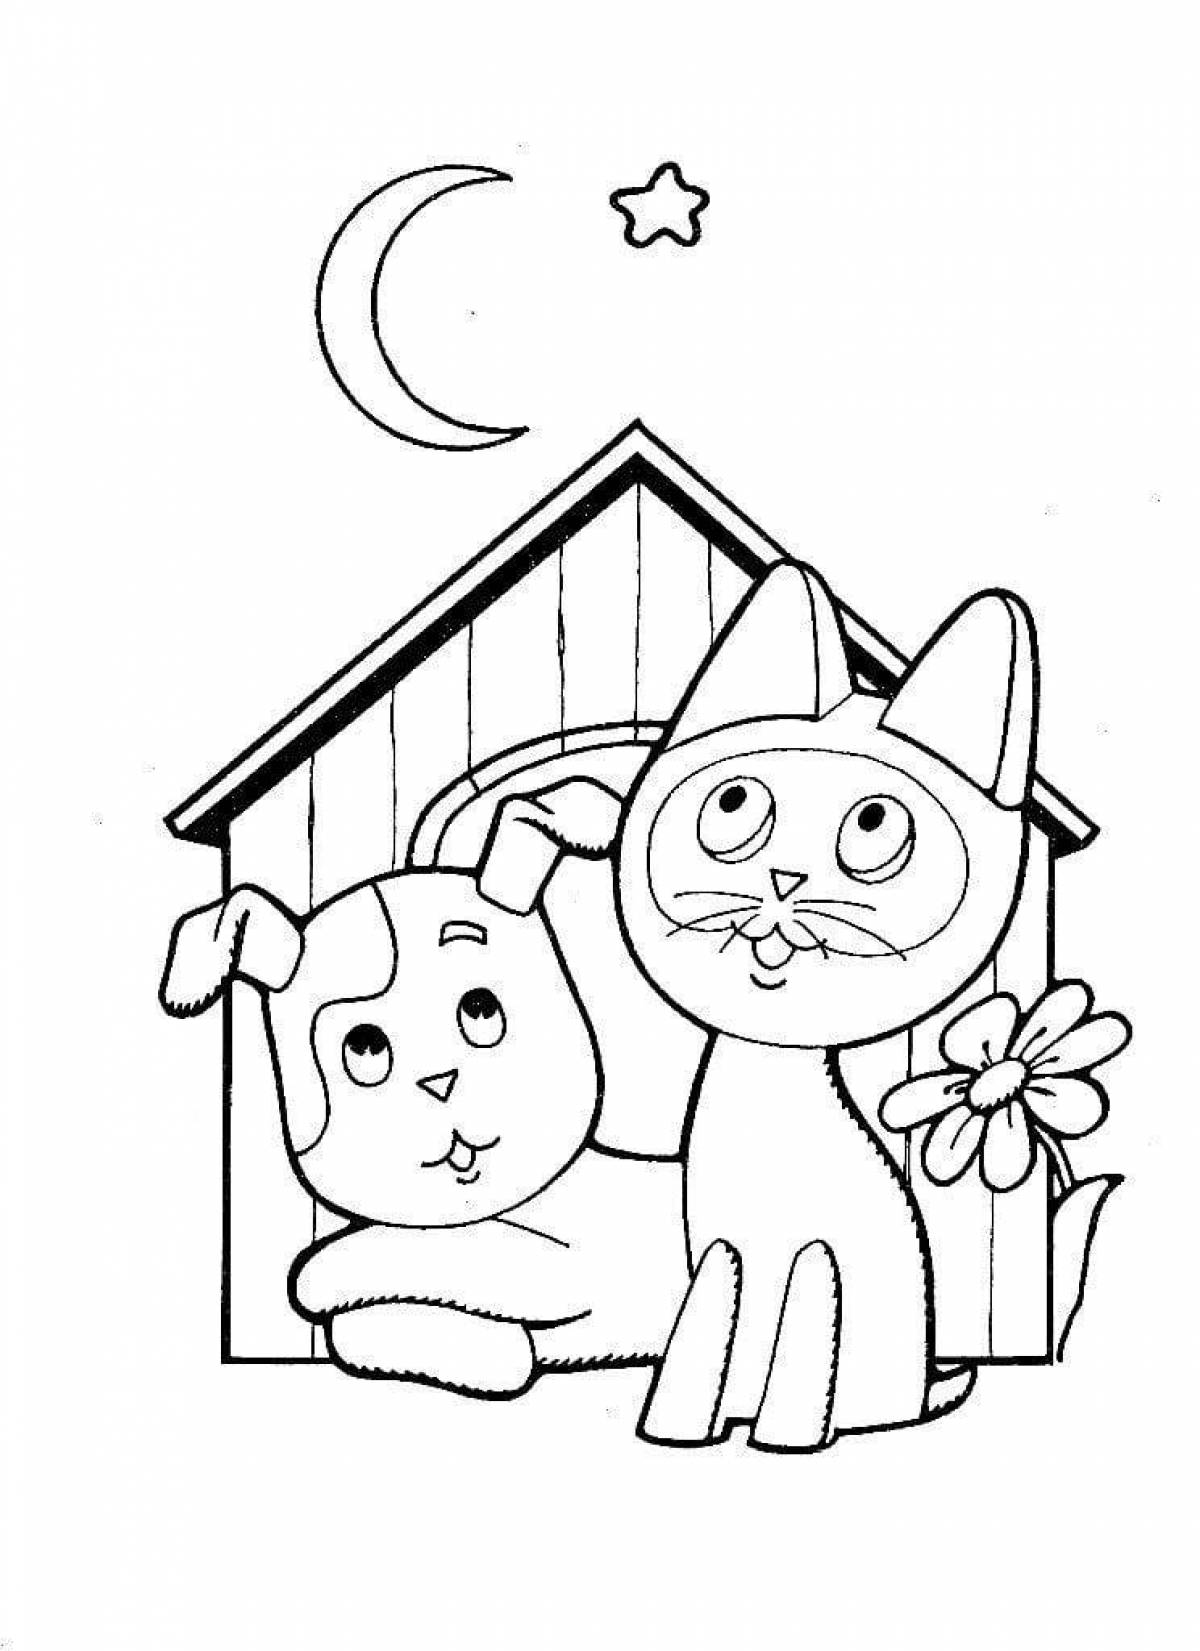 Kitten live coloring